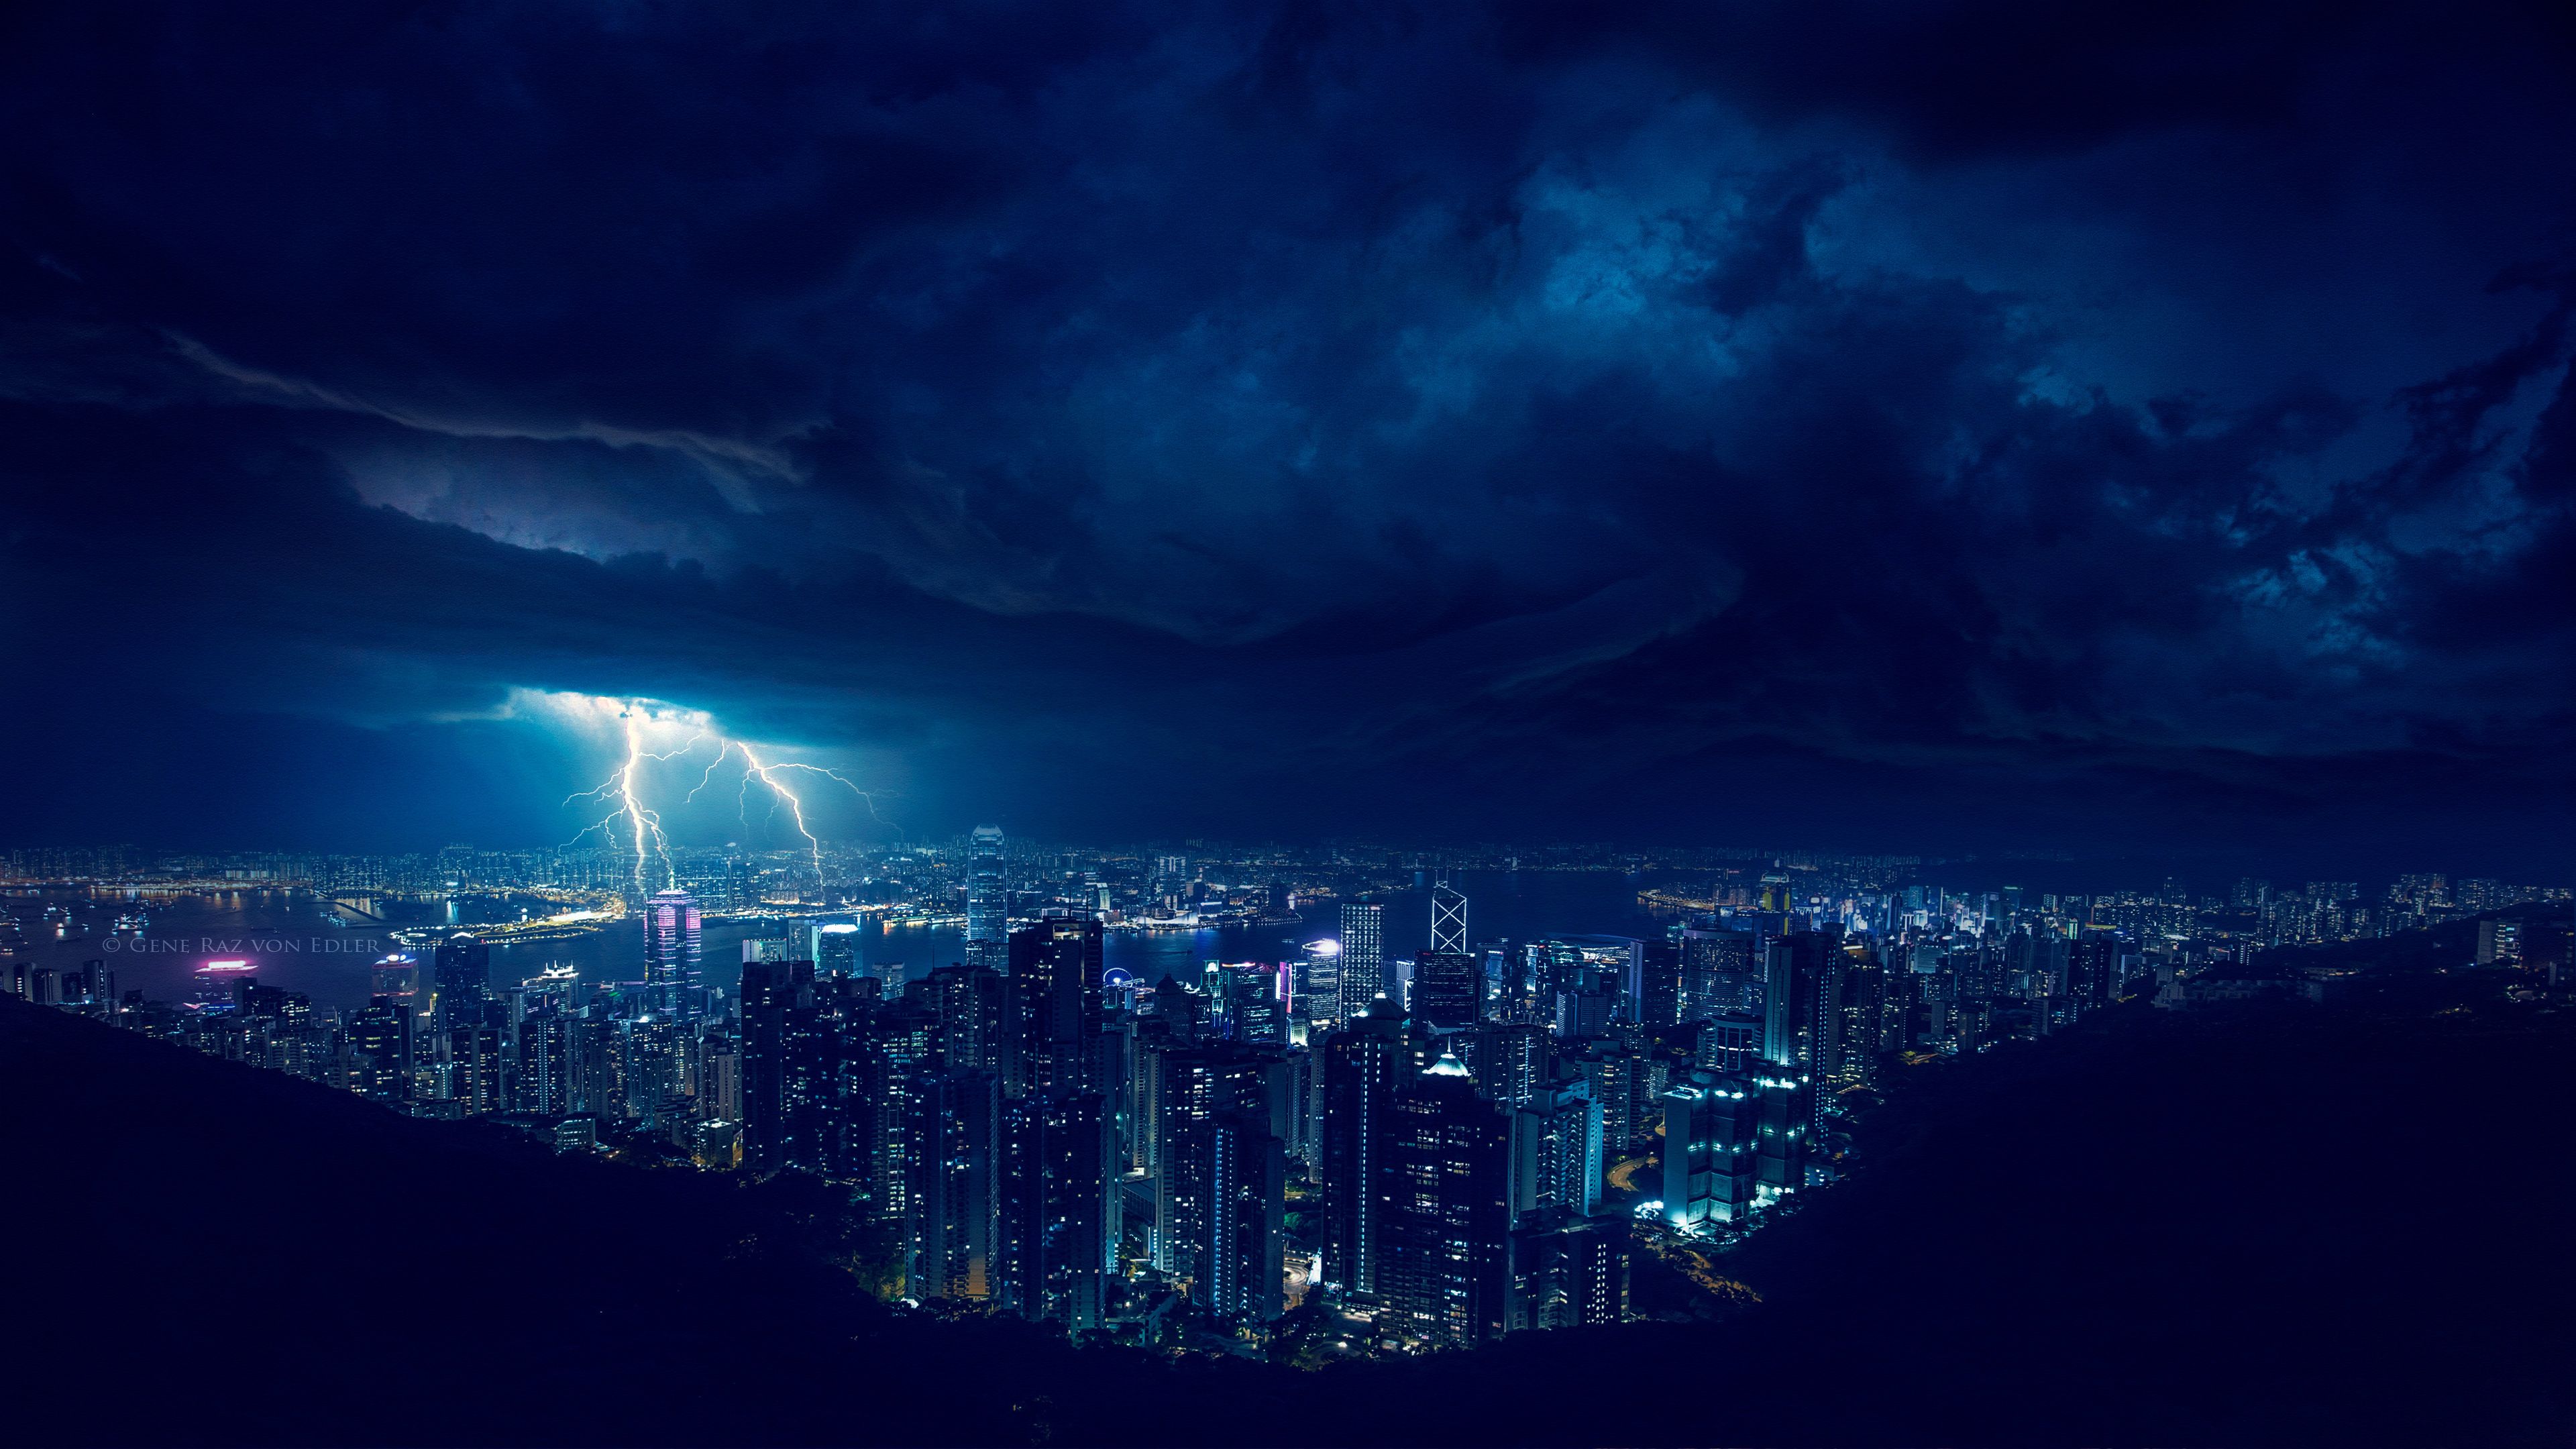 A city at night with lightning in the sky - Storm